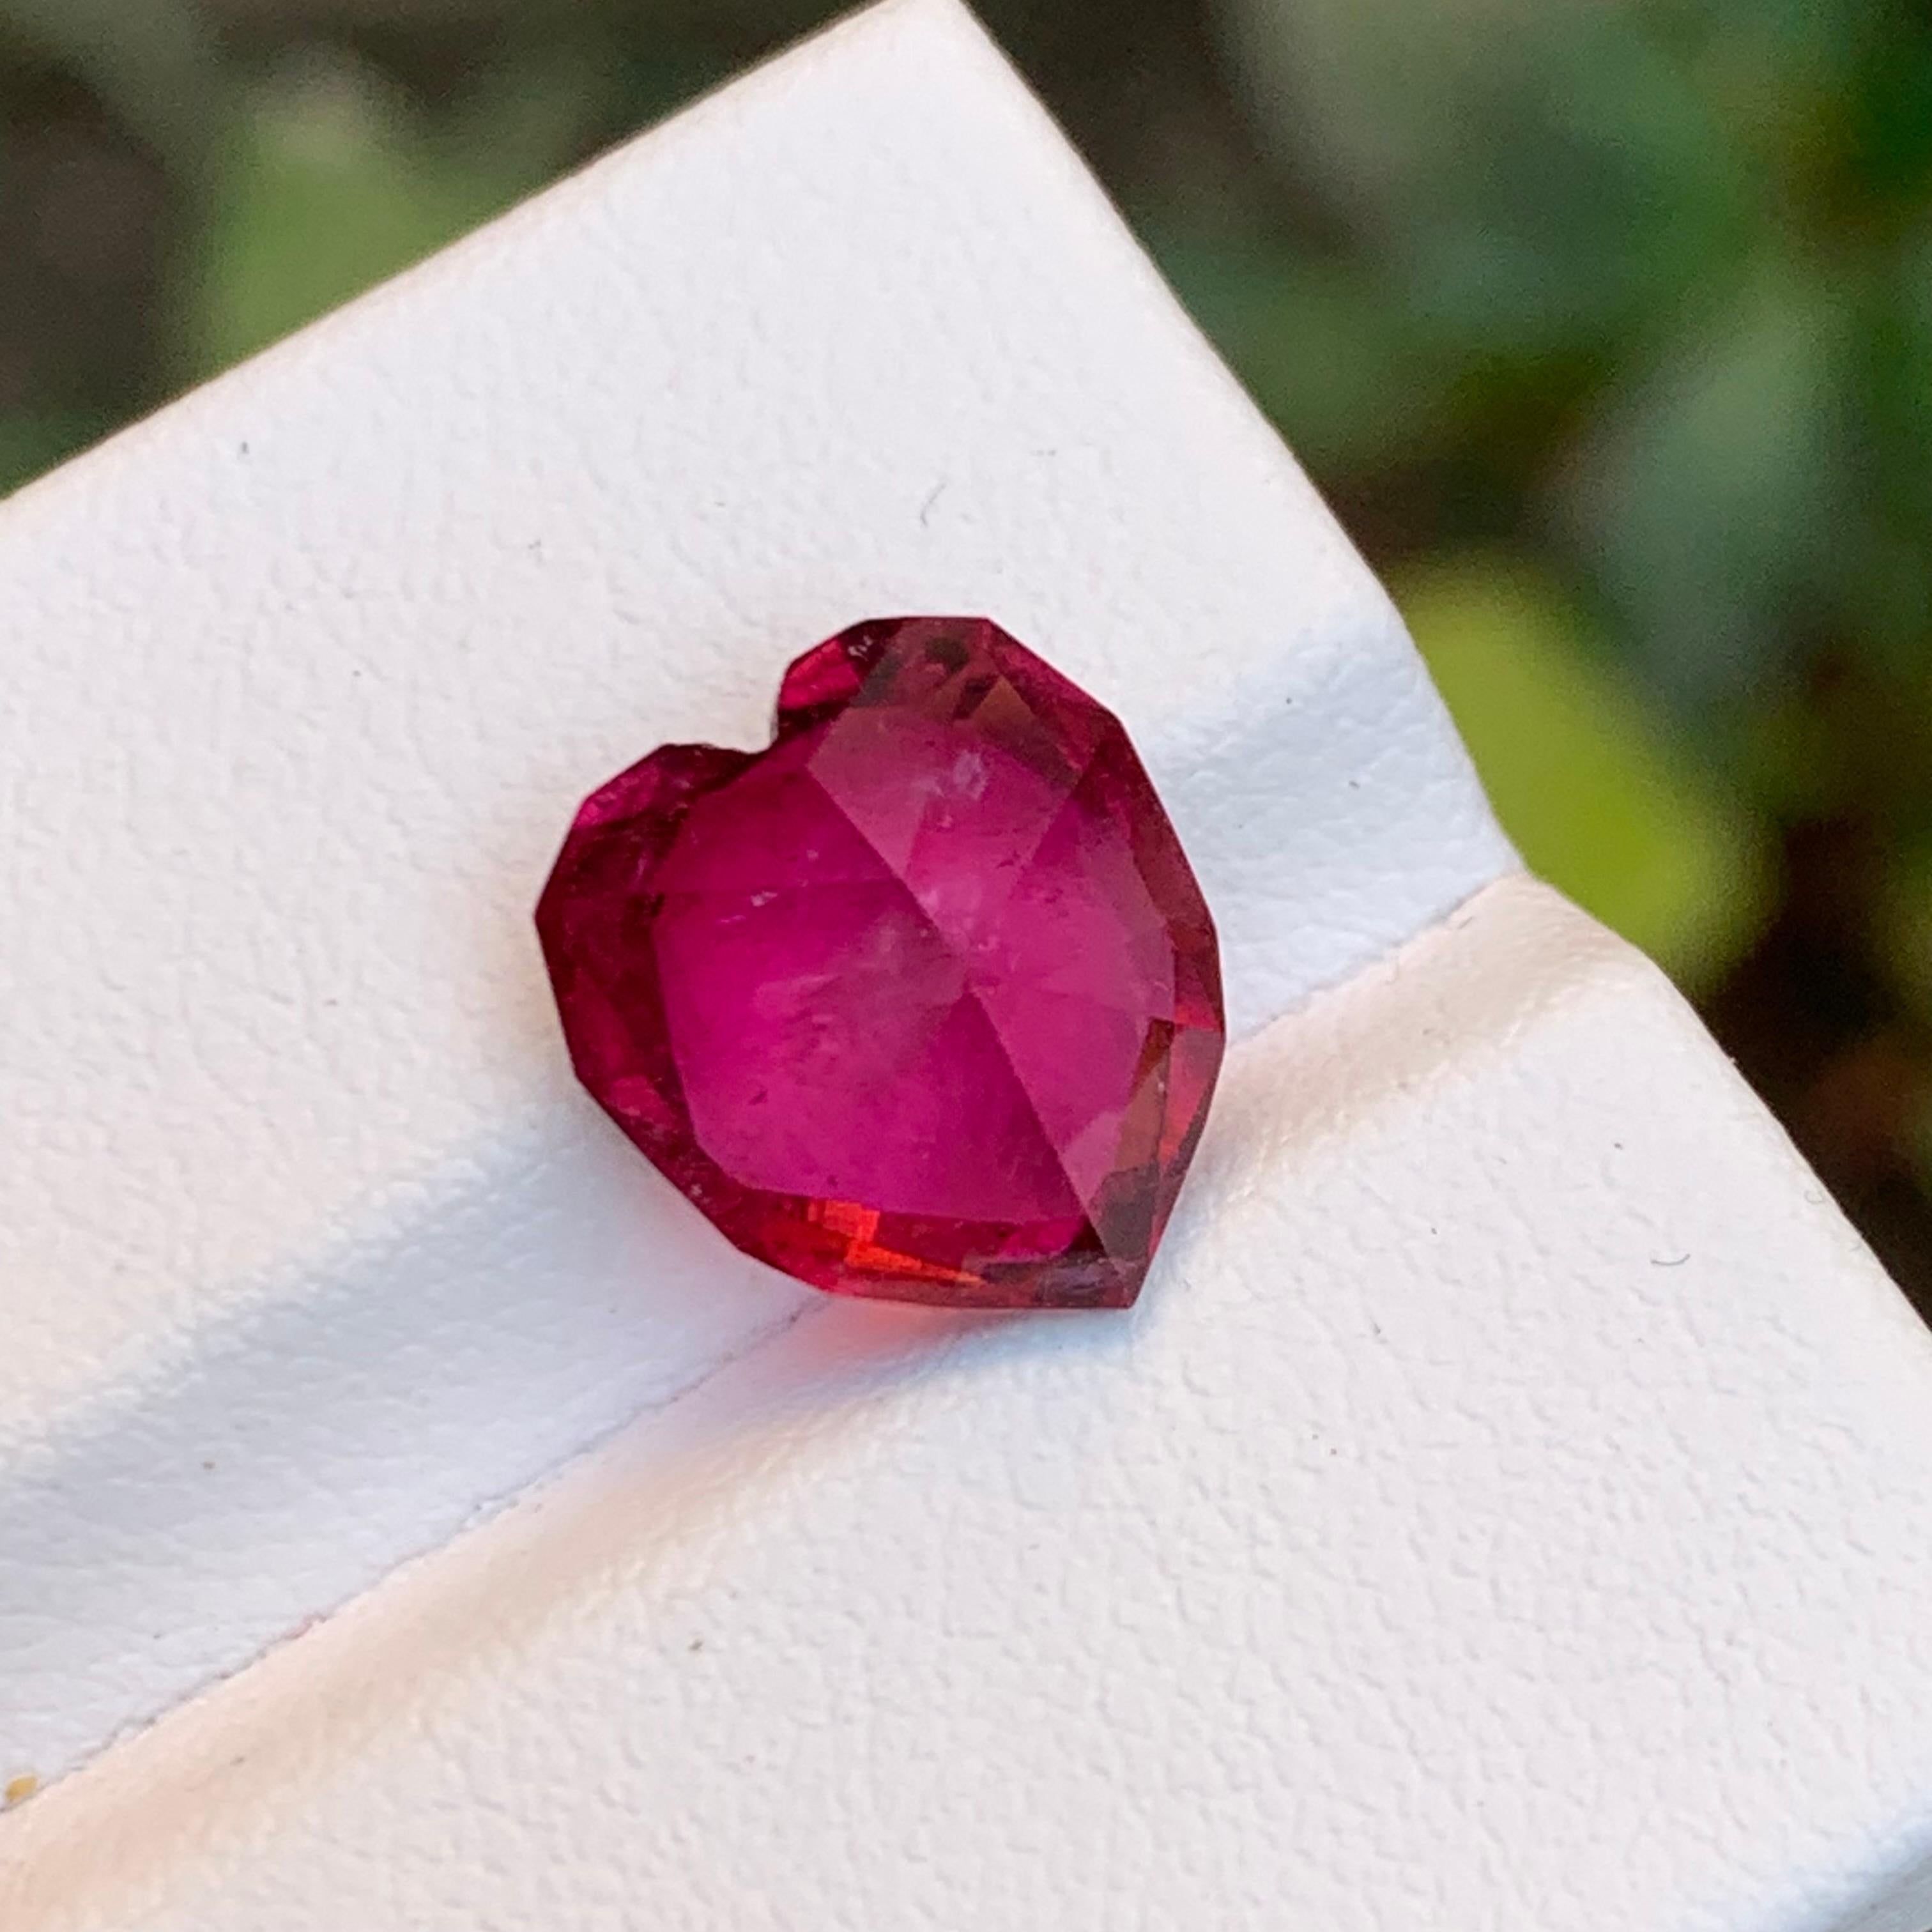 Contemporary Rare Red Pink Natural Rubellite Tourmaline 4.70 Carat Brilliant Heart Shape Afg For Sale